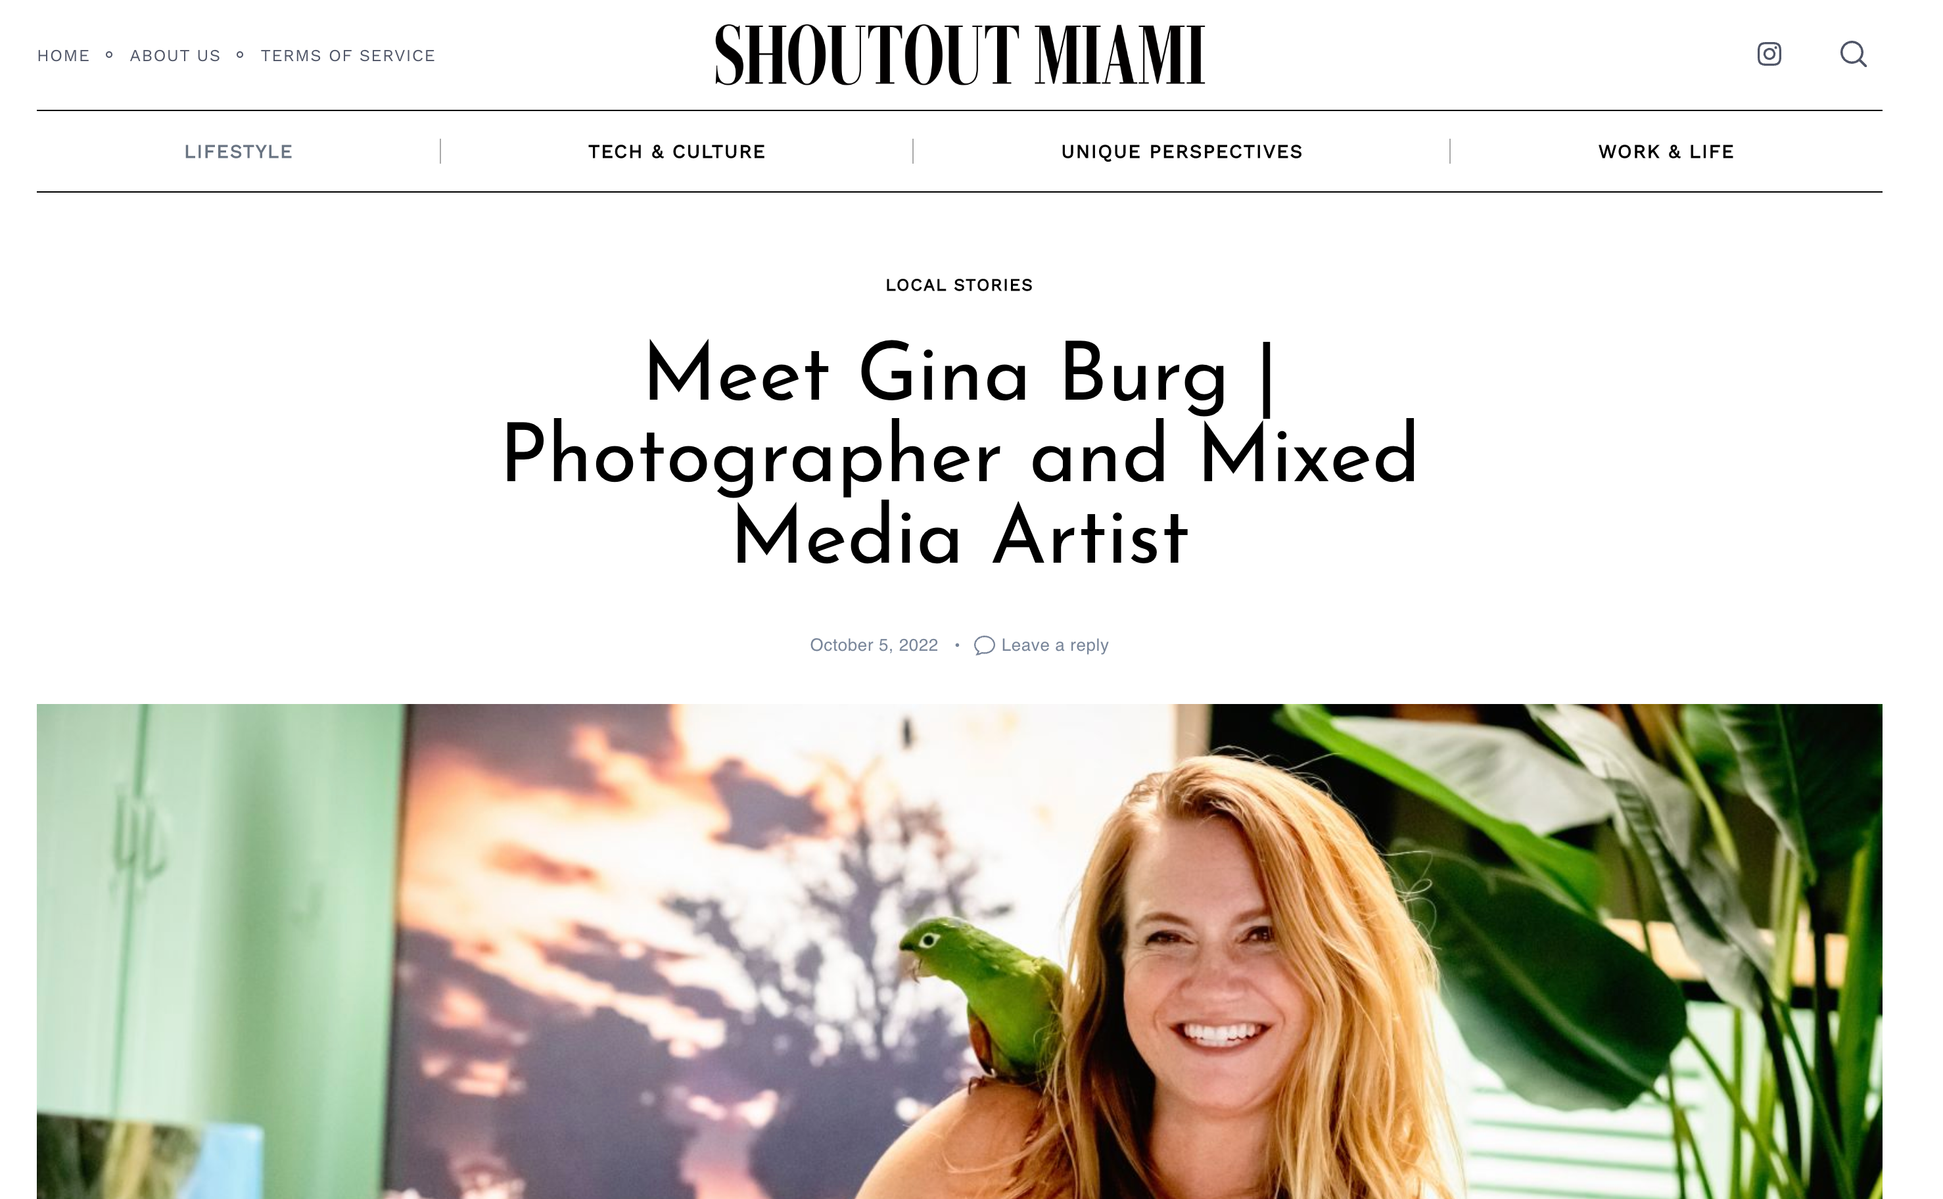 Cover image if my article on Shoutout Miami